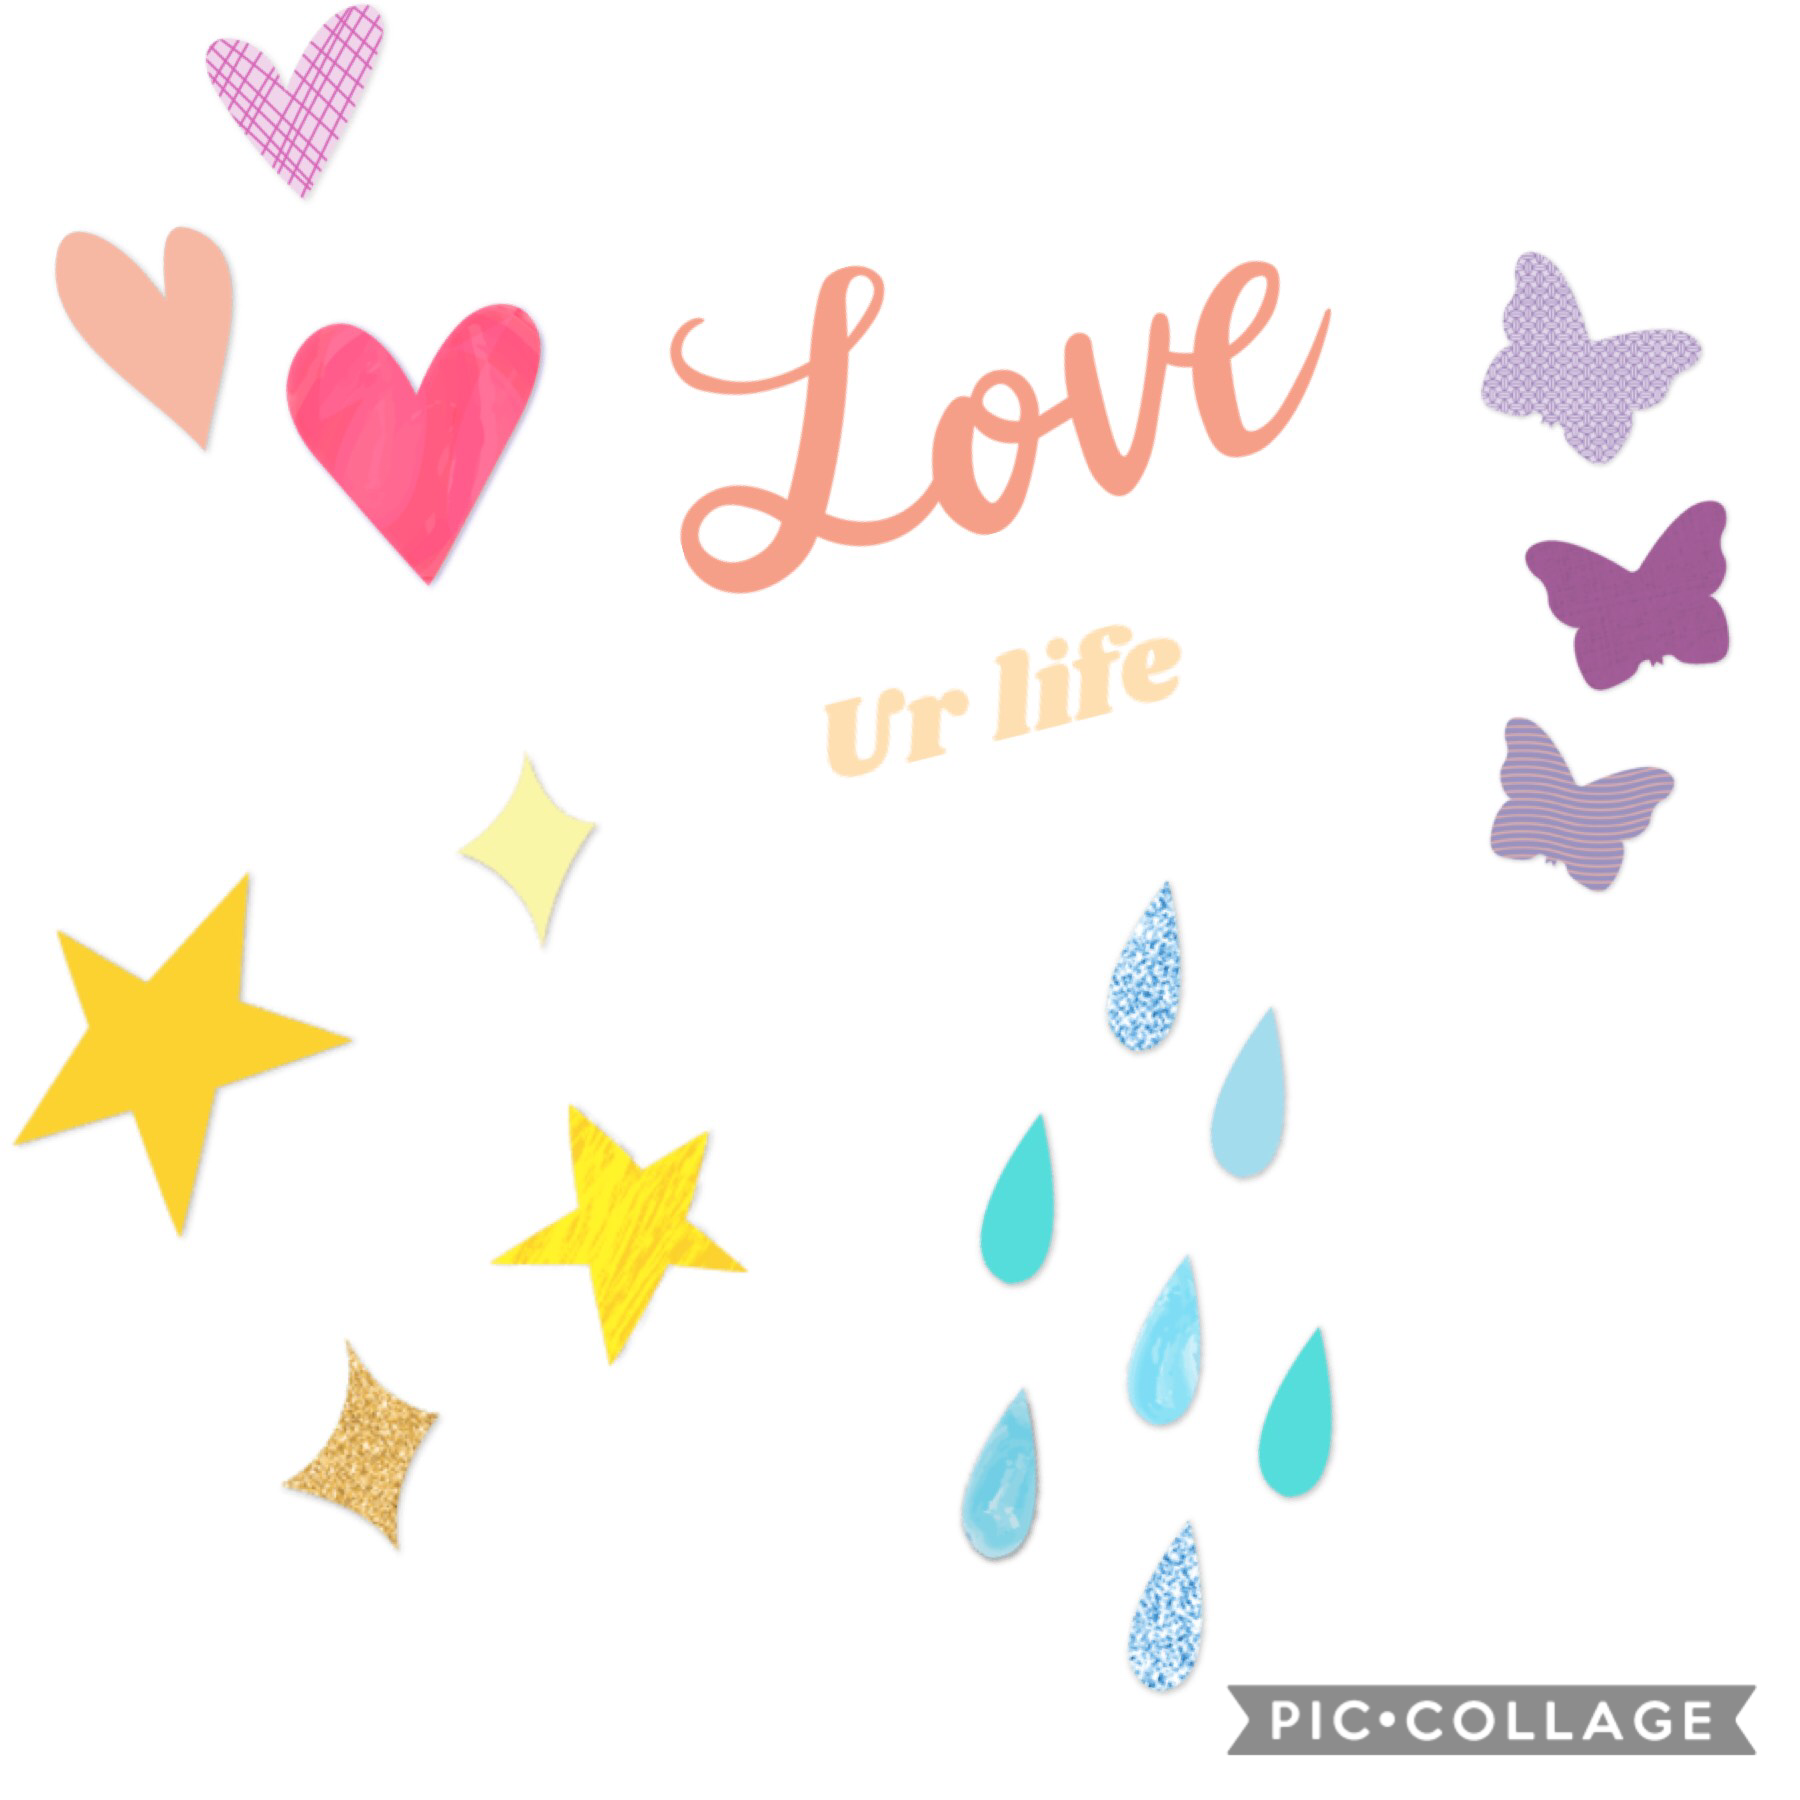 Love your life family and friends and pets 💜😍😍😘🥰🥰🥰🥰💝💜💜👍🏻😍😍😘🥰🥰💝💝💝💜💜💜💜💝💝💝😍😘😘🥰